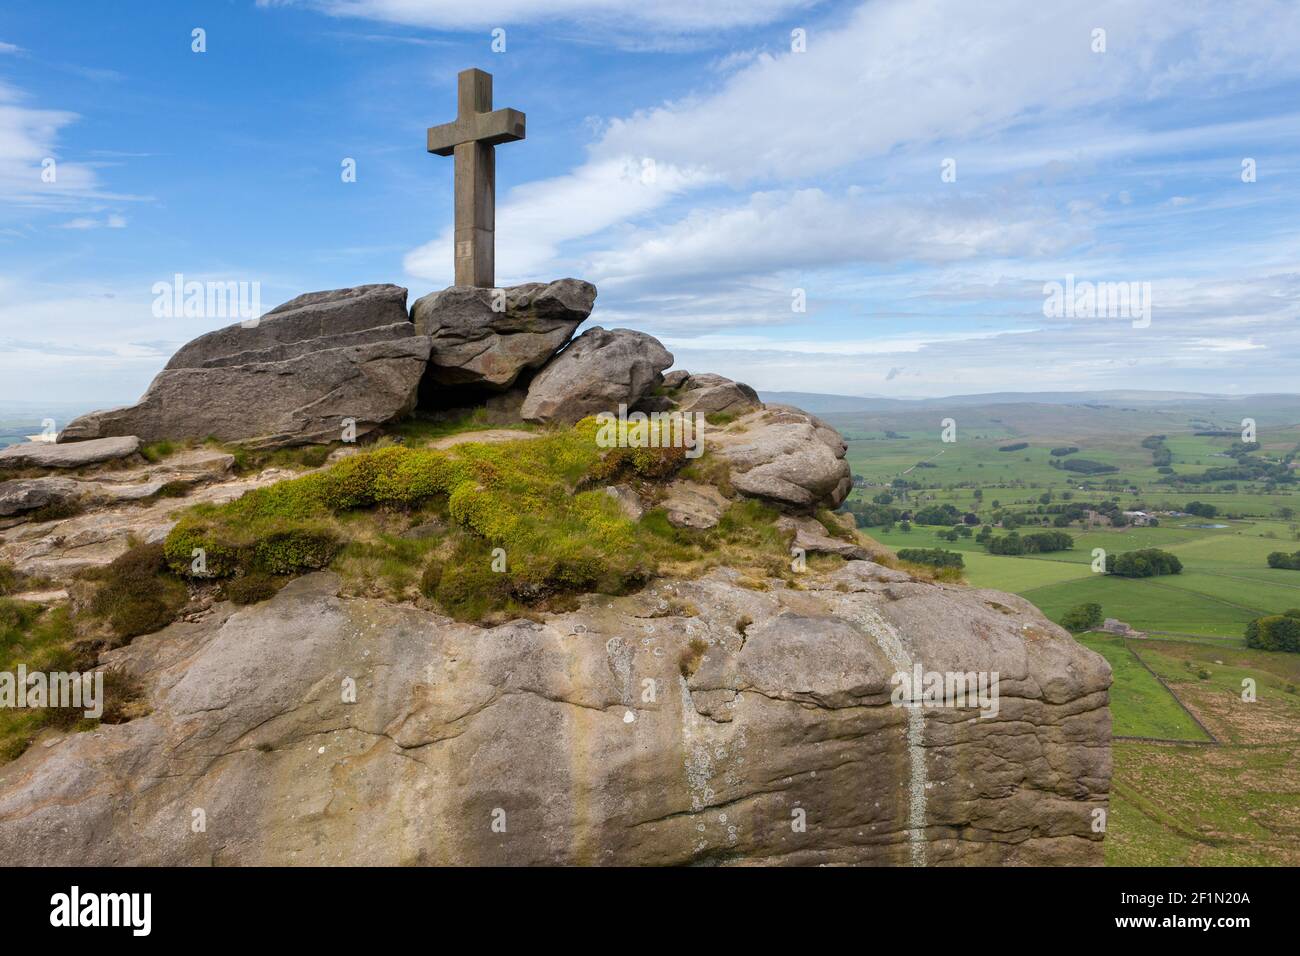 Rylstone Cross stands high on the fell above Rylstone village with extensive views across Ariedale Stock Photo